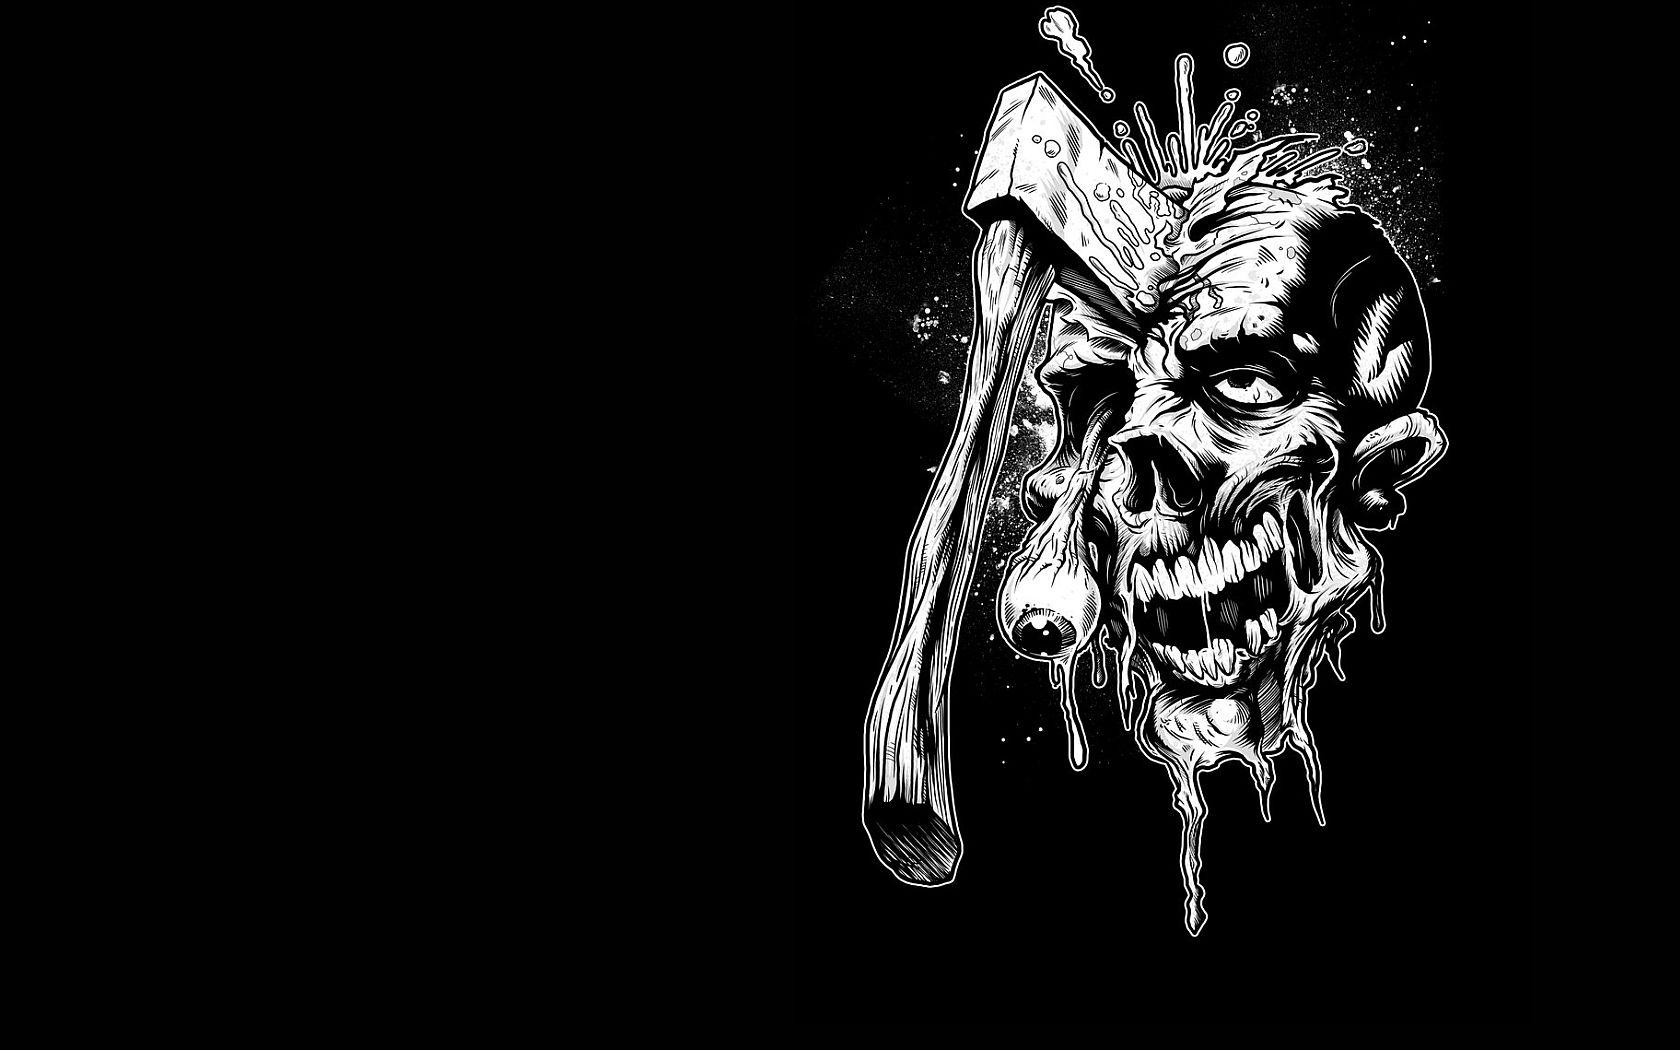 Download the Axed Zombie Wallpaper, Axed Zombie iPhone Wallpaper